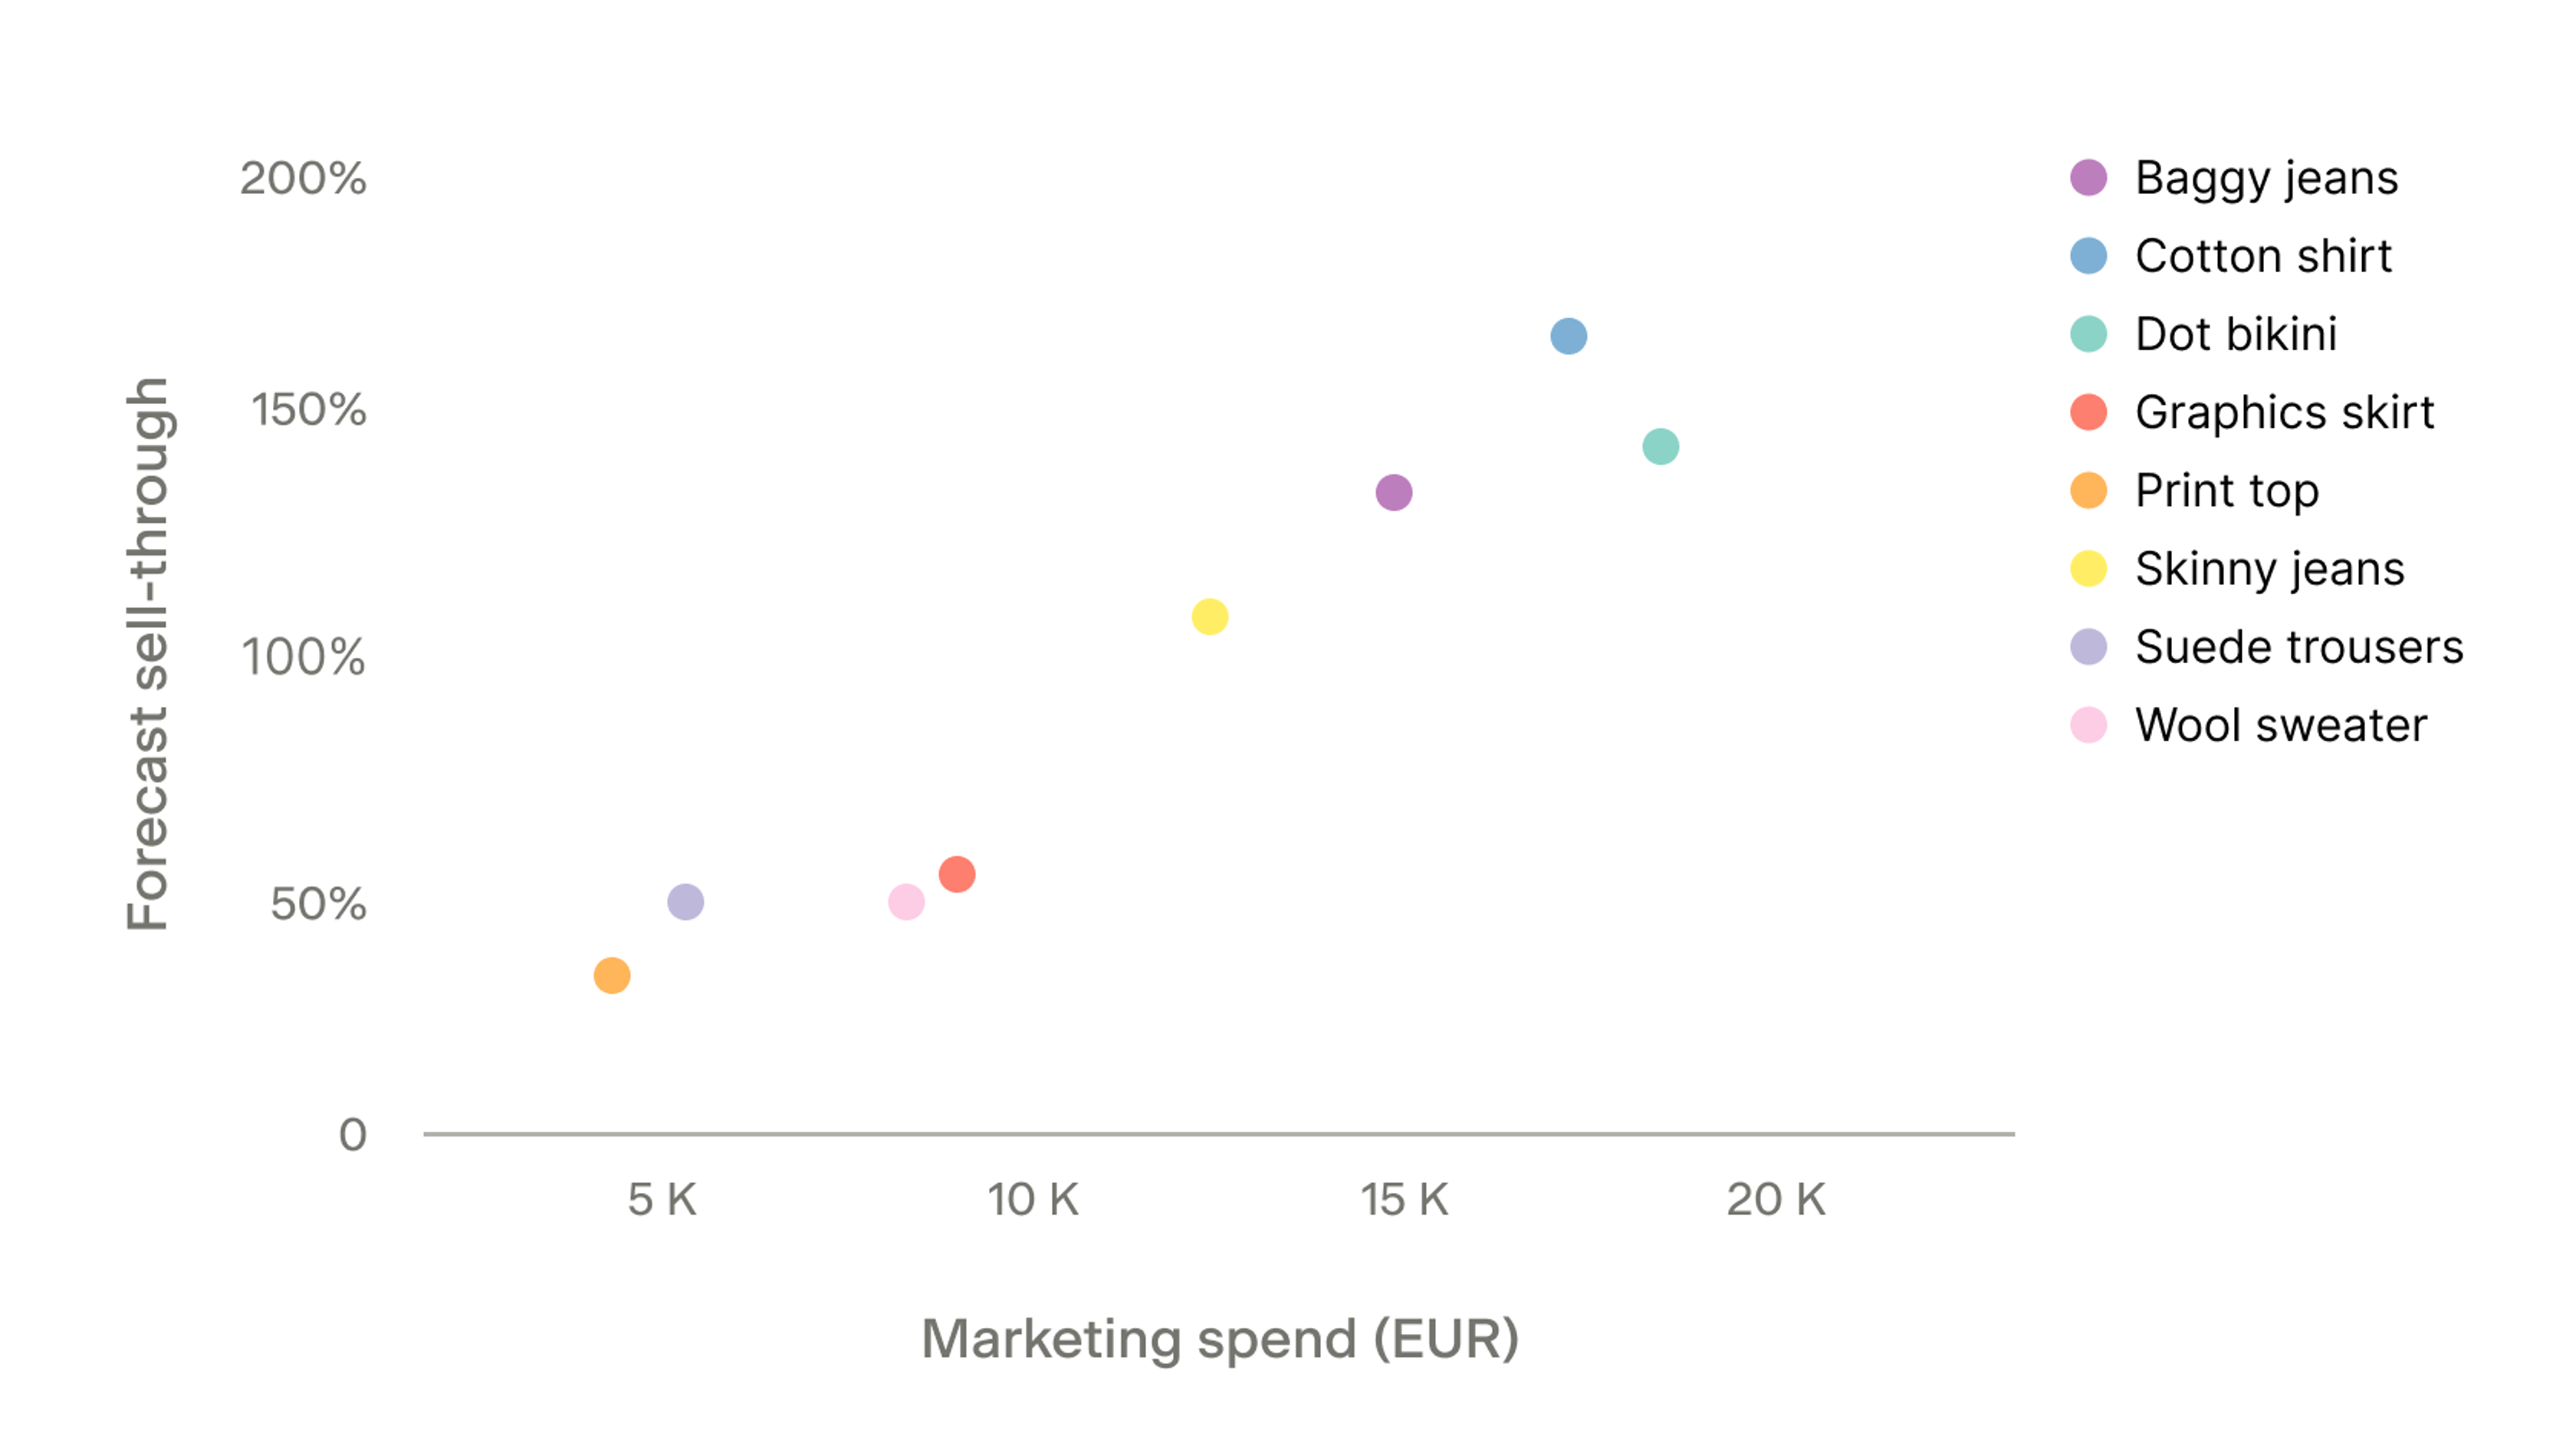 Scatterplot showing sell-through rate to marketing spend for some products